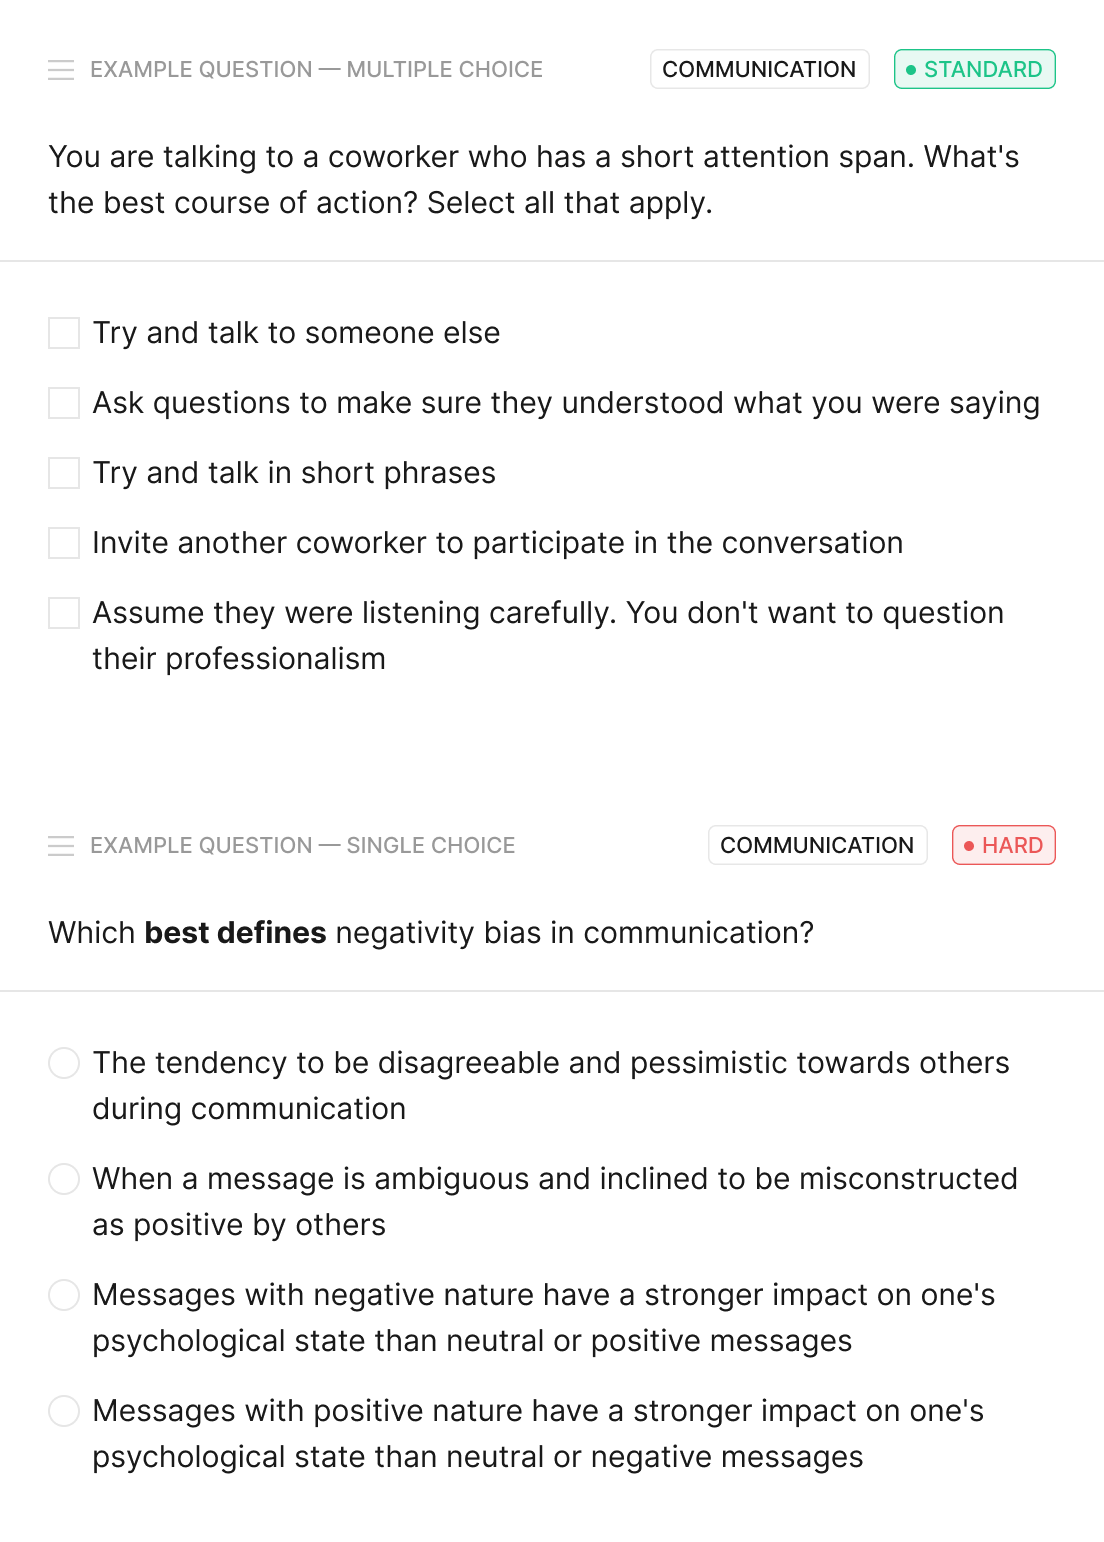 soft skills question samples on Toggl Hire